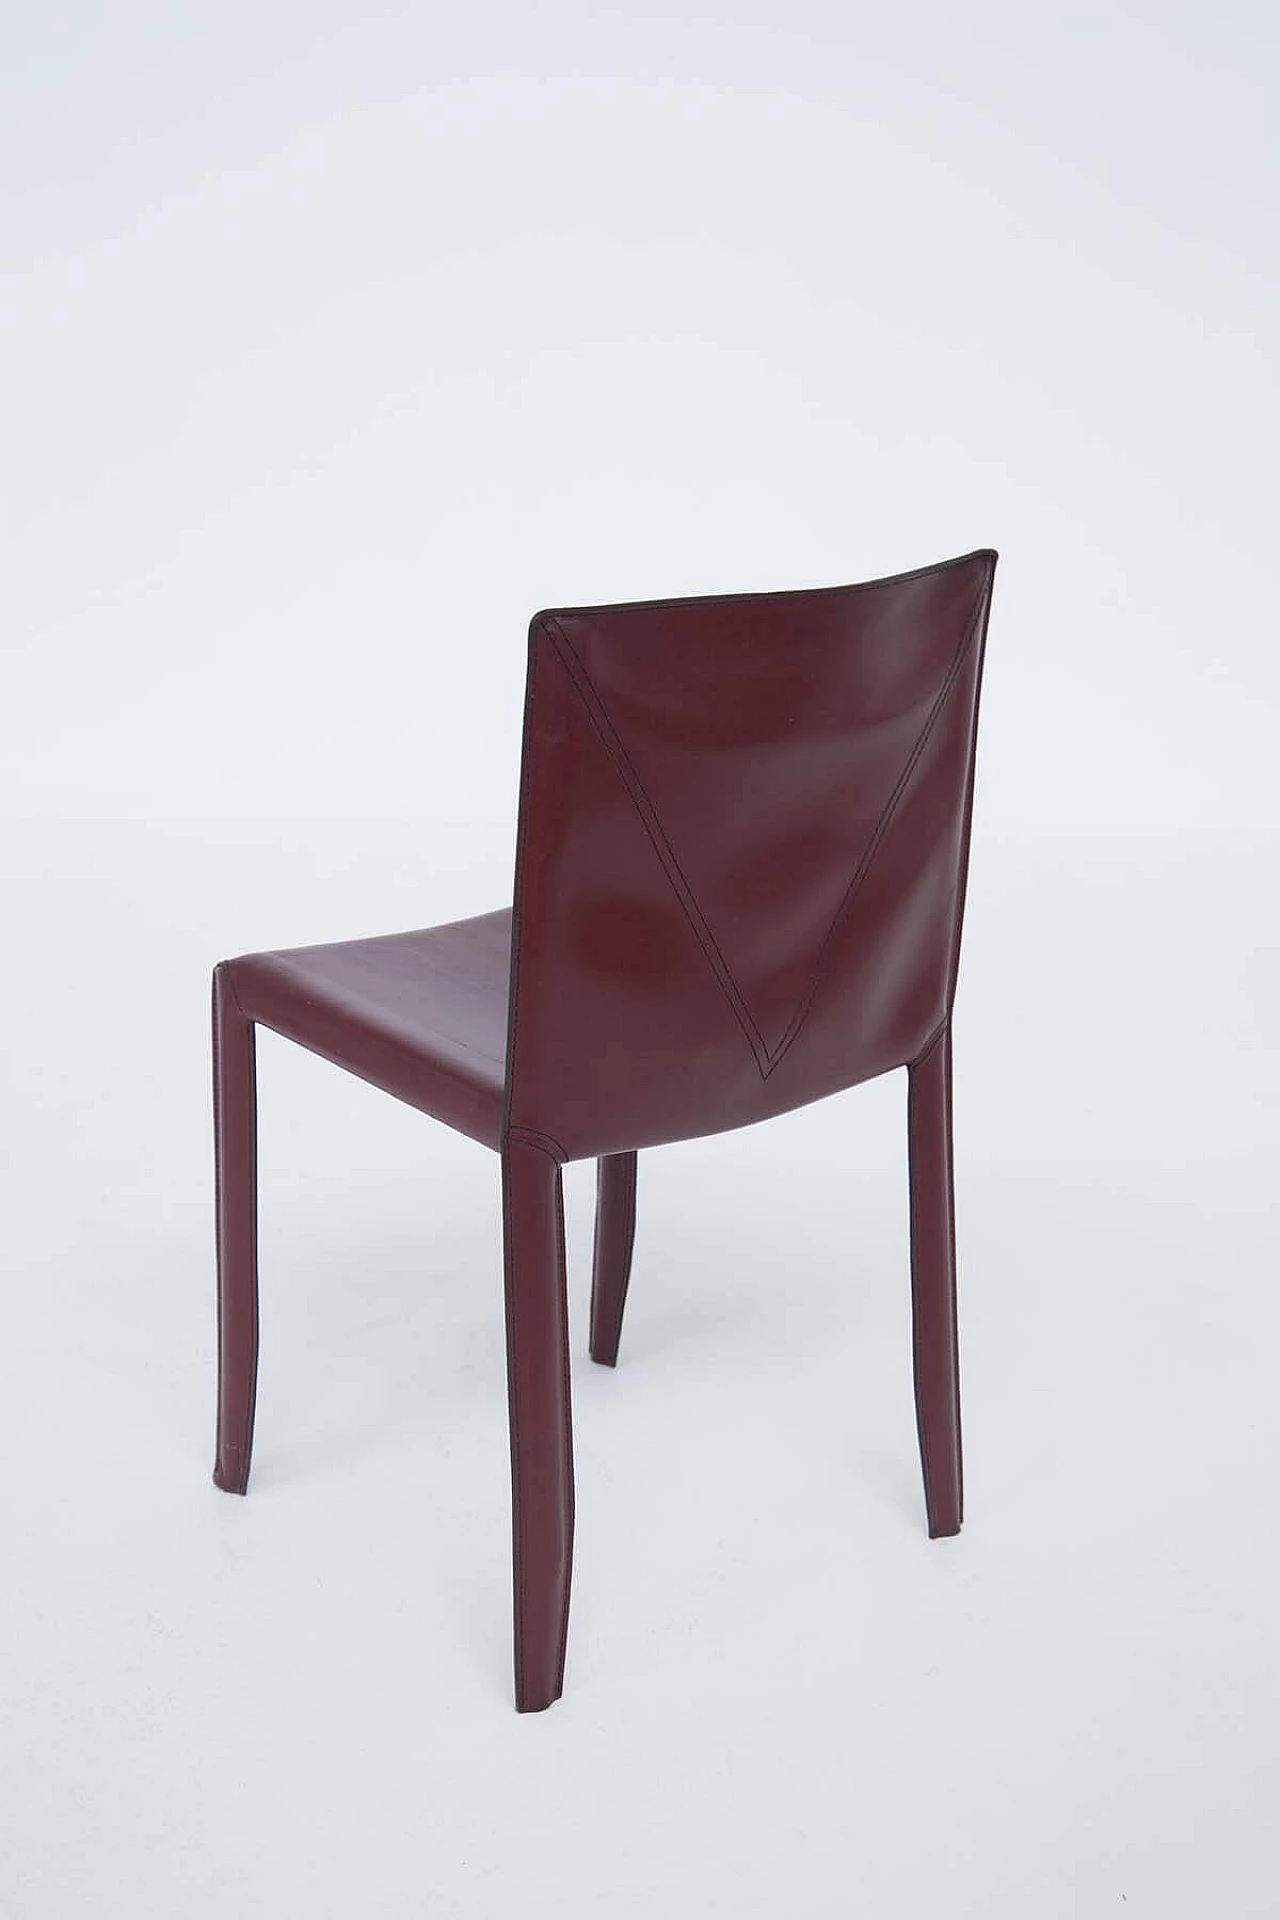 6 burgundy leather table chairs with visible stitching for Cattelan Italia, 1980s 1380247